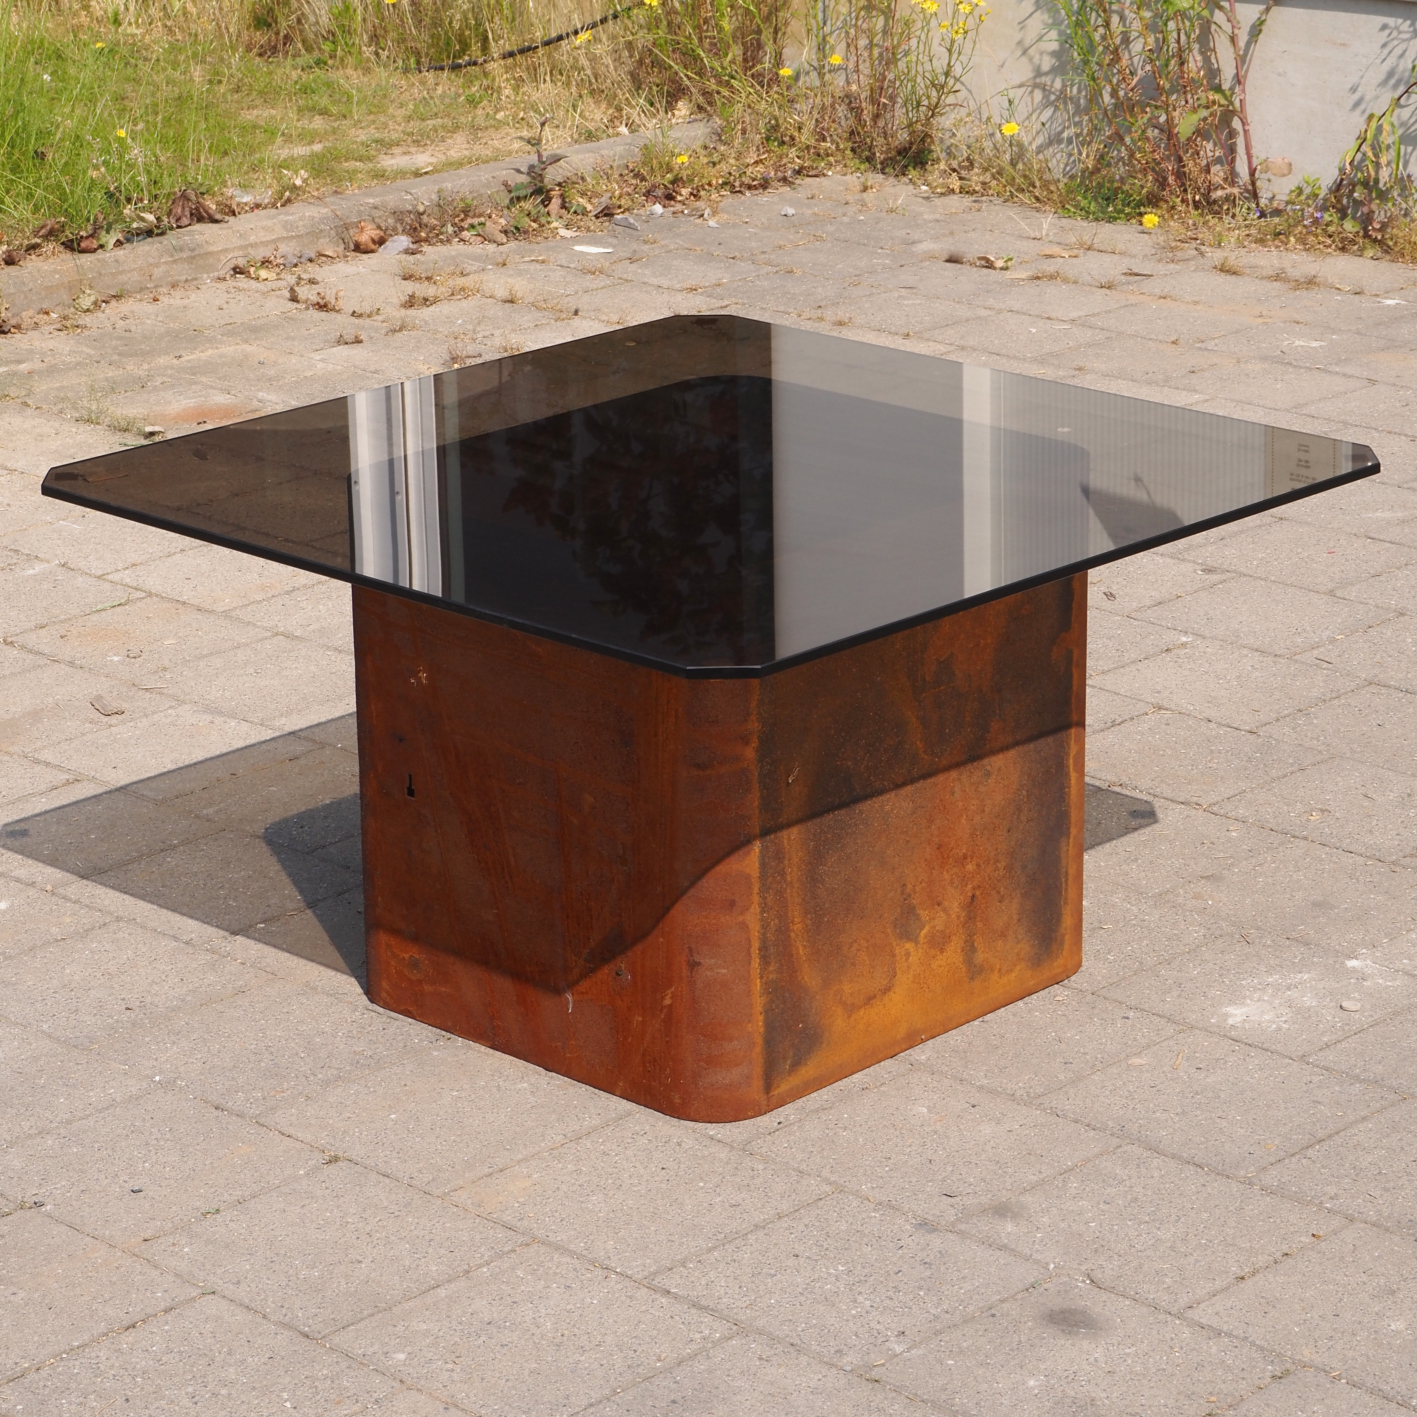 Coffee table top by GHYCZY (82 x 62 cm) - Smoked